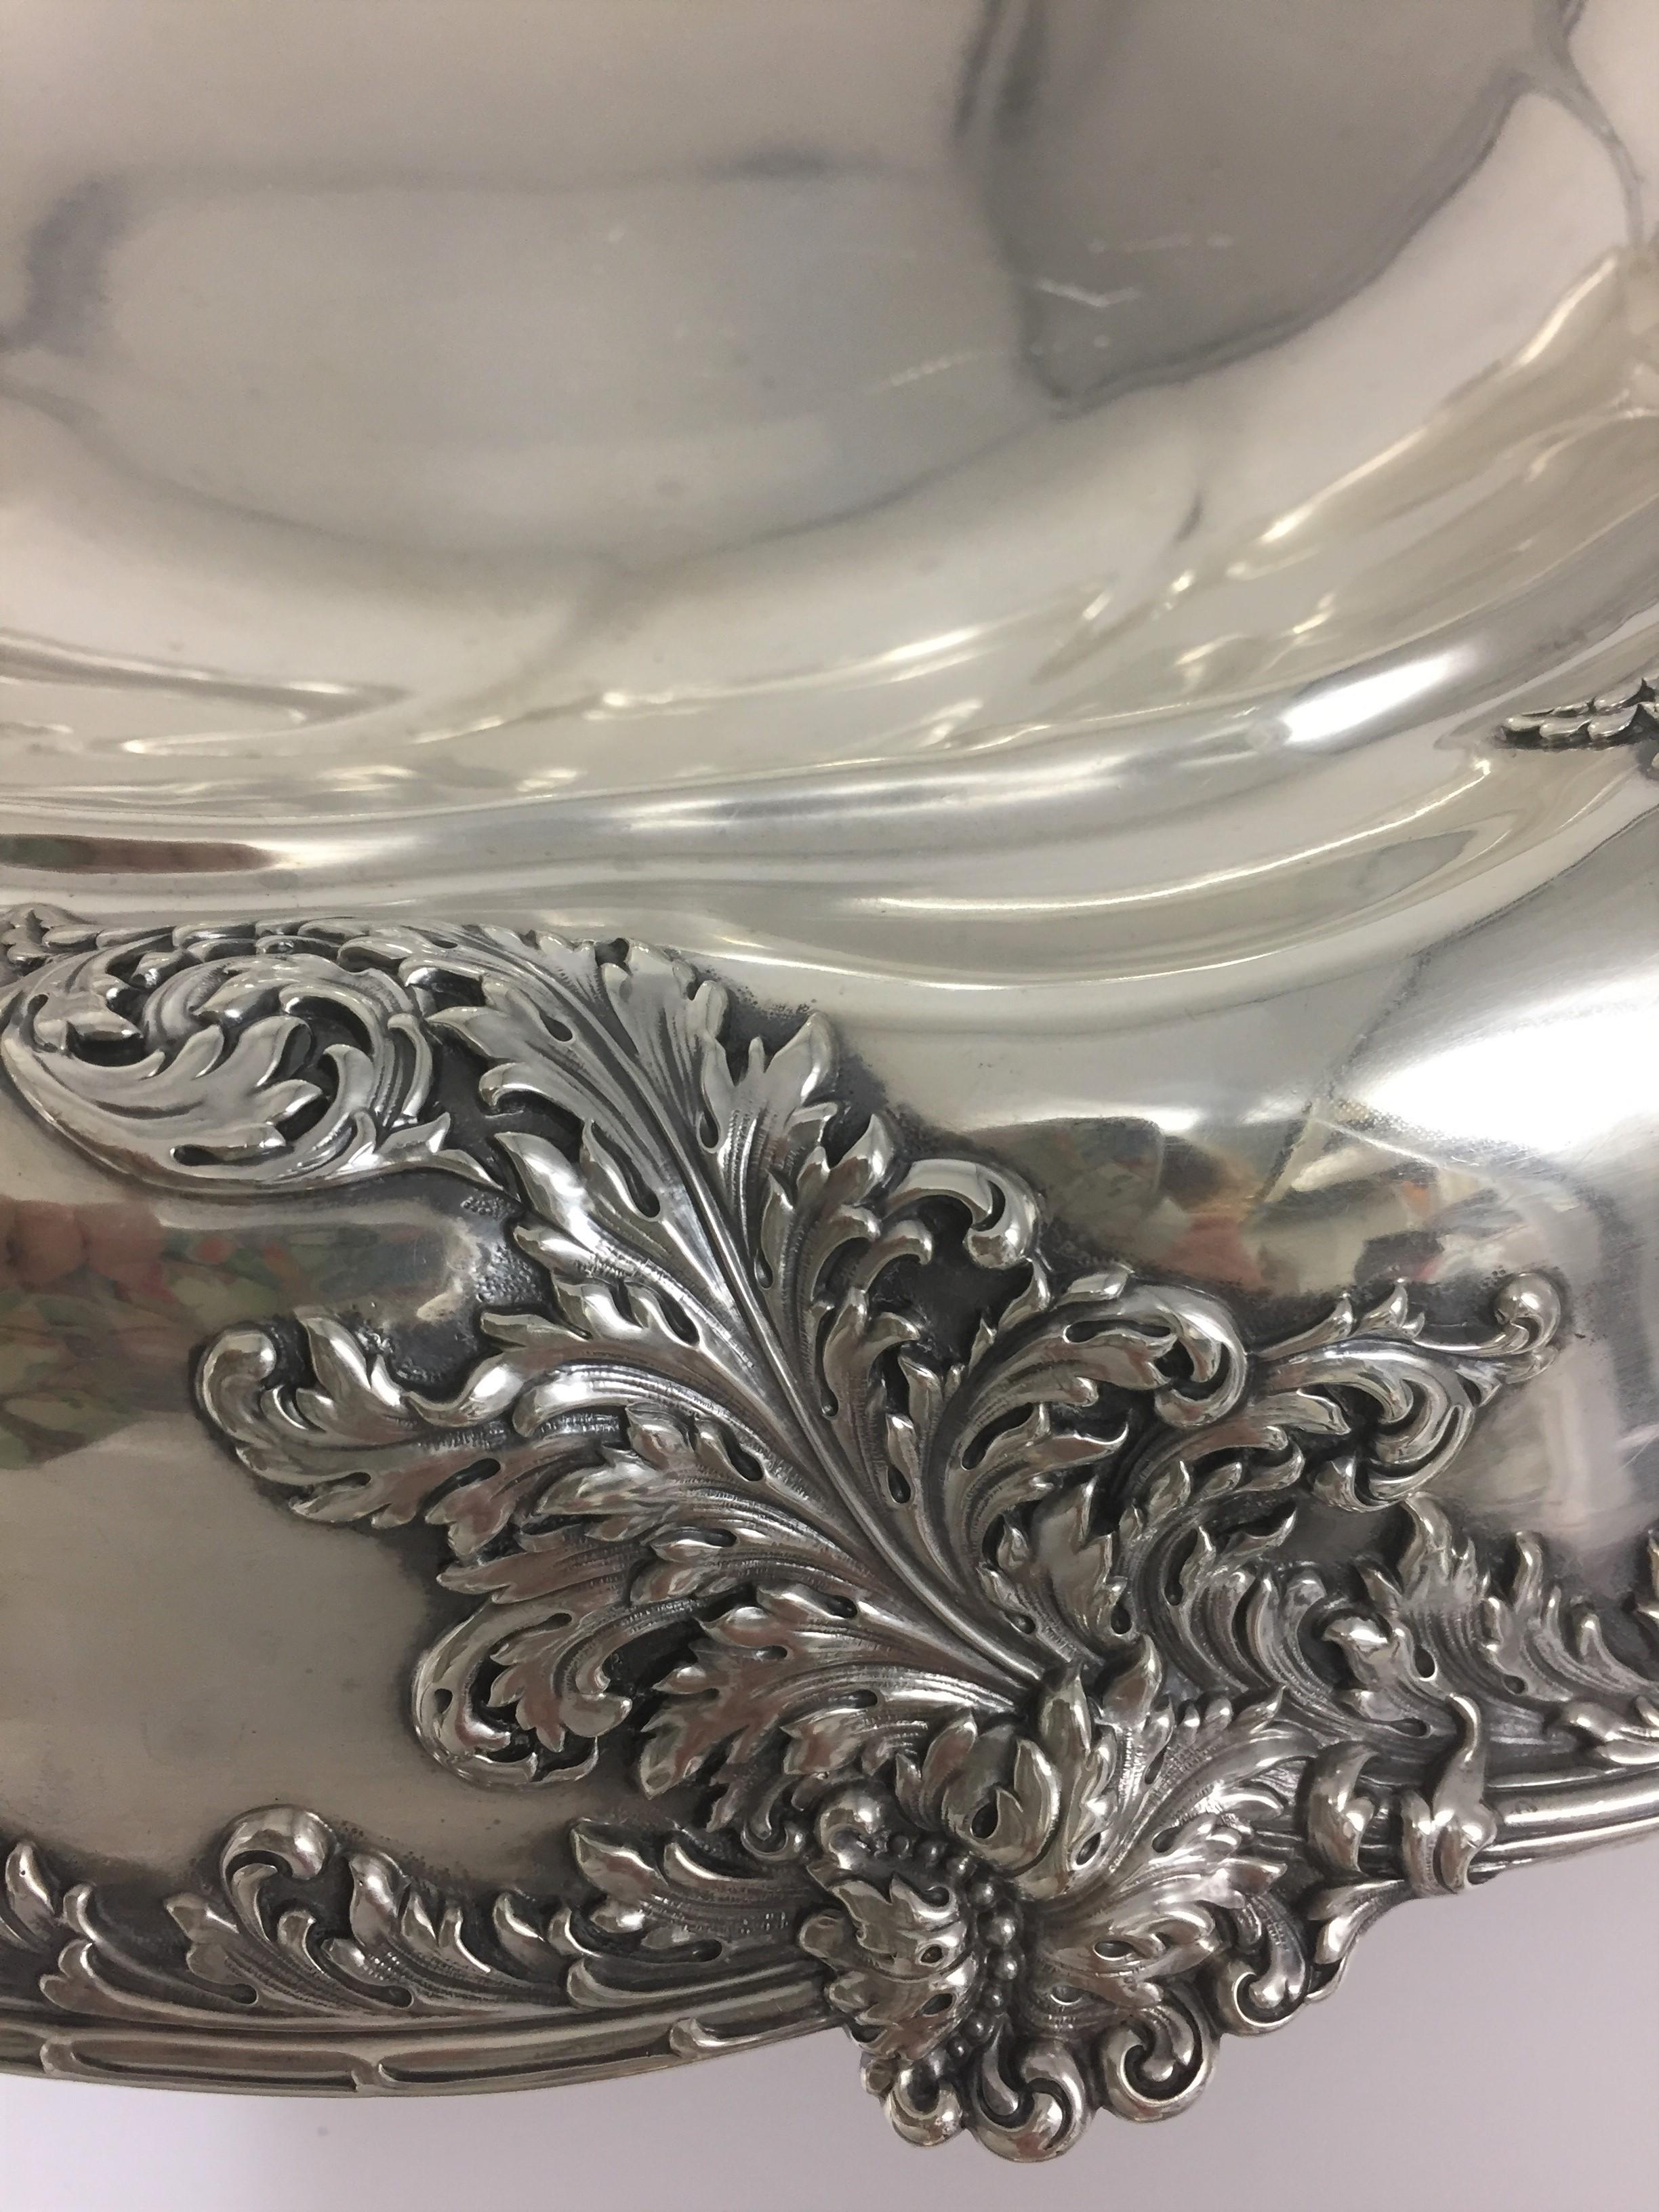 Extraordinary large American sterling silver center bowl, by Tiffany & Co., New York from 1895. Designed with ornate leaf pattern around parameter. Measuring 5 inches in height and 19.5 inches in diameter, large. Weighing 114 troy ounces. Bearing